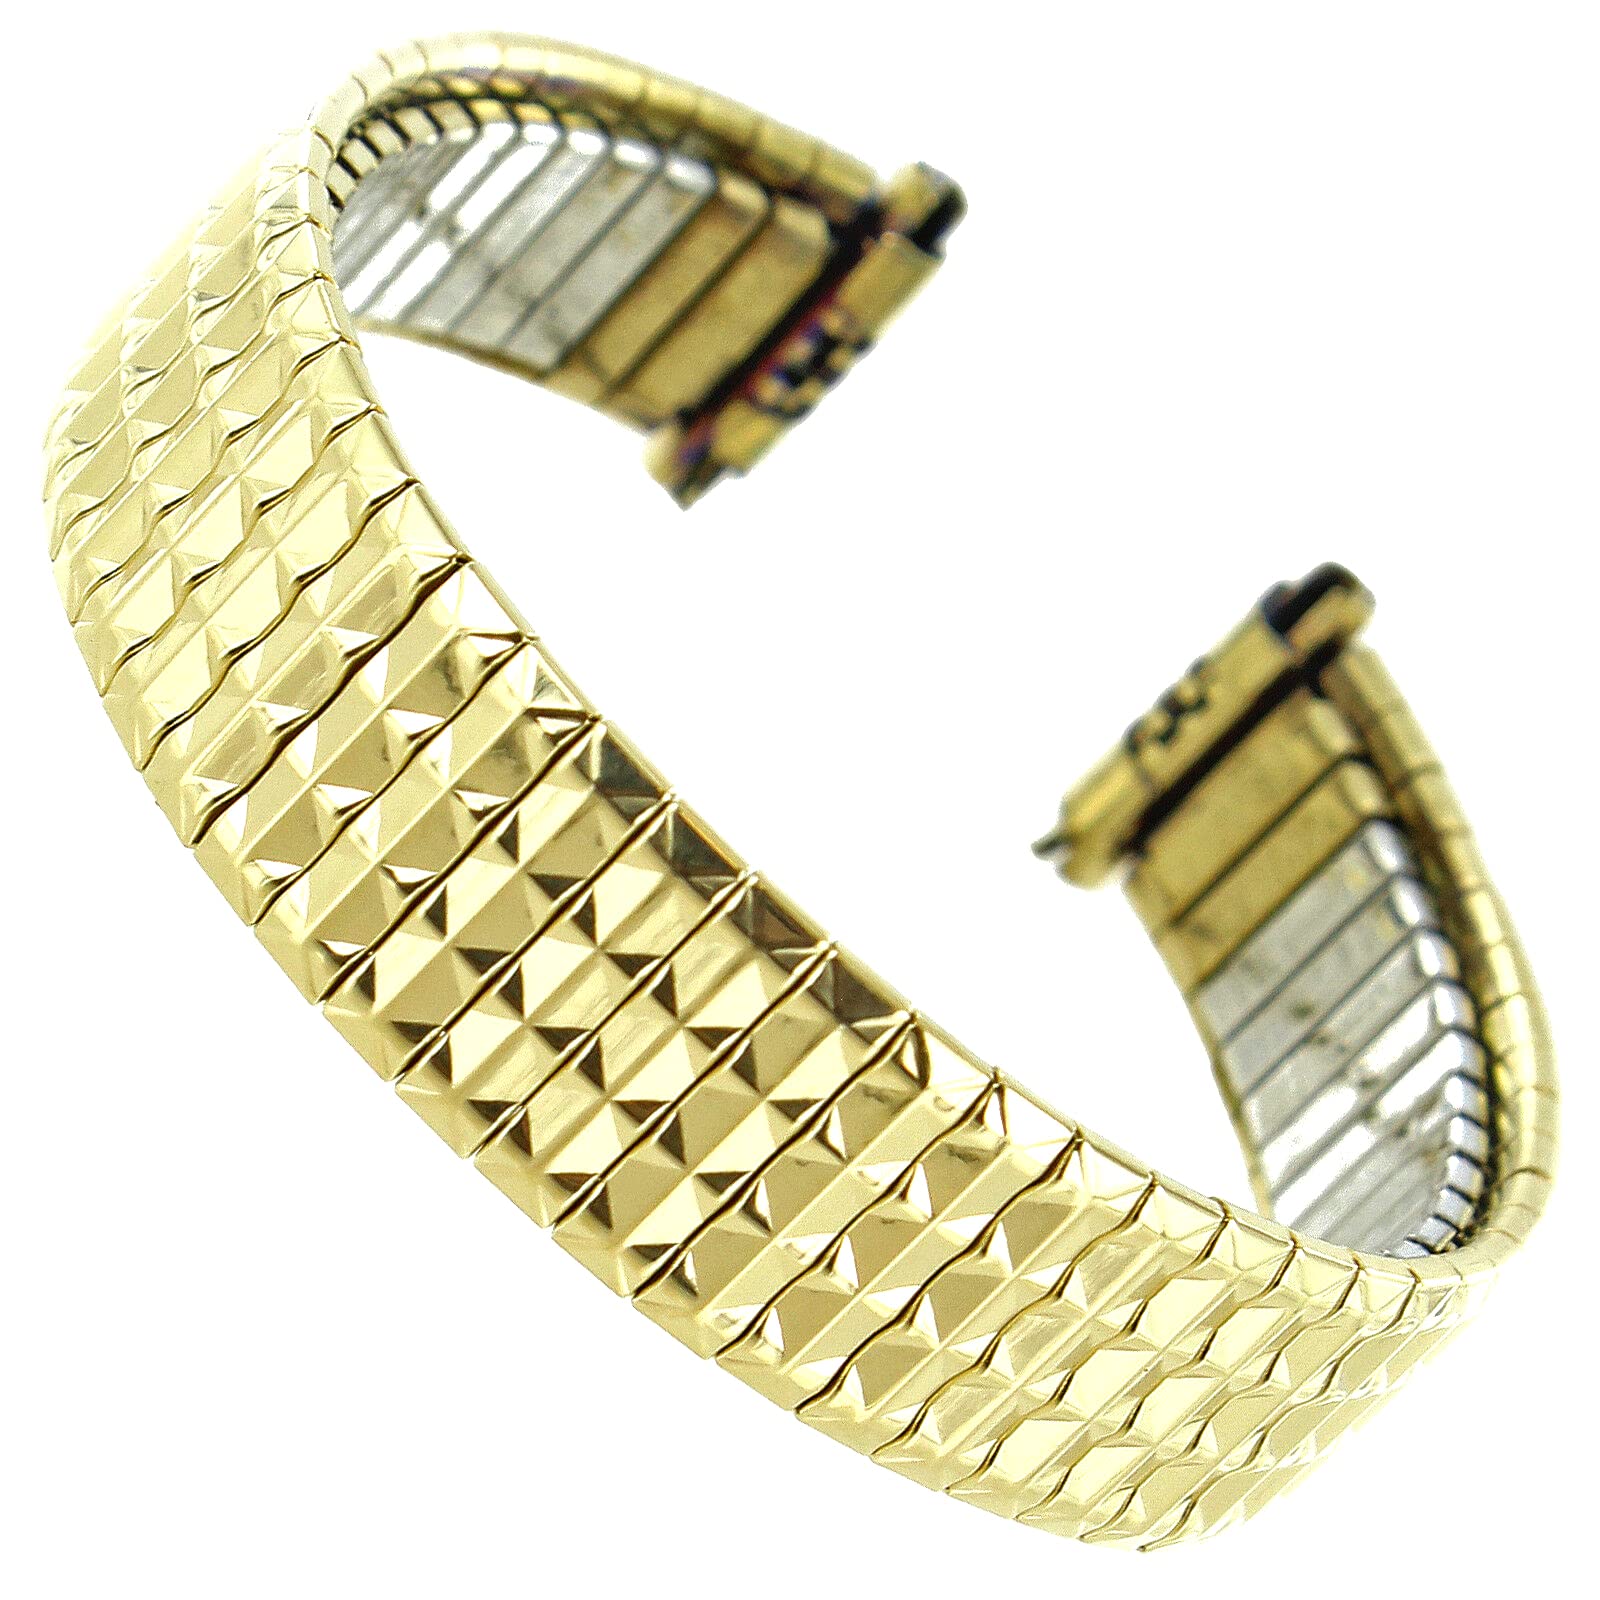 11-14mm Speidel Gold Stainless Steel Ladies Expansion Watch Bands 2254/32